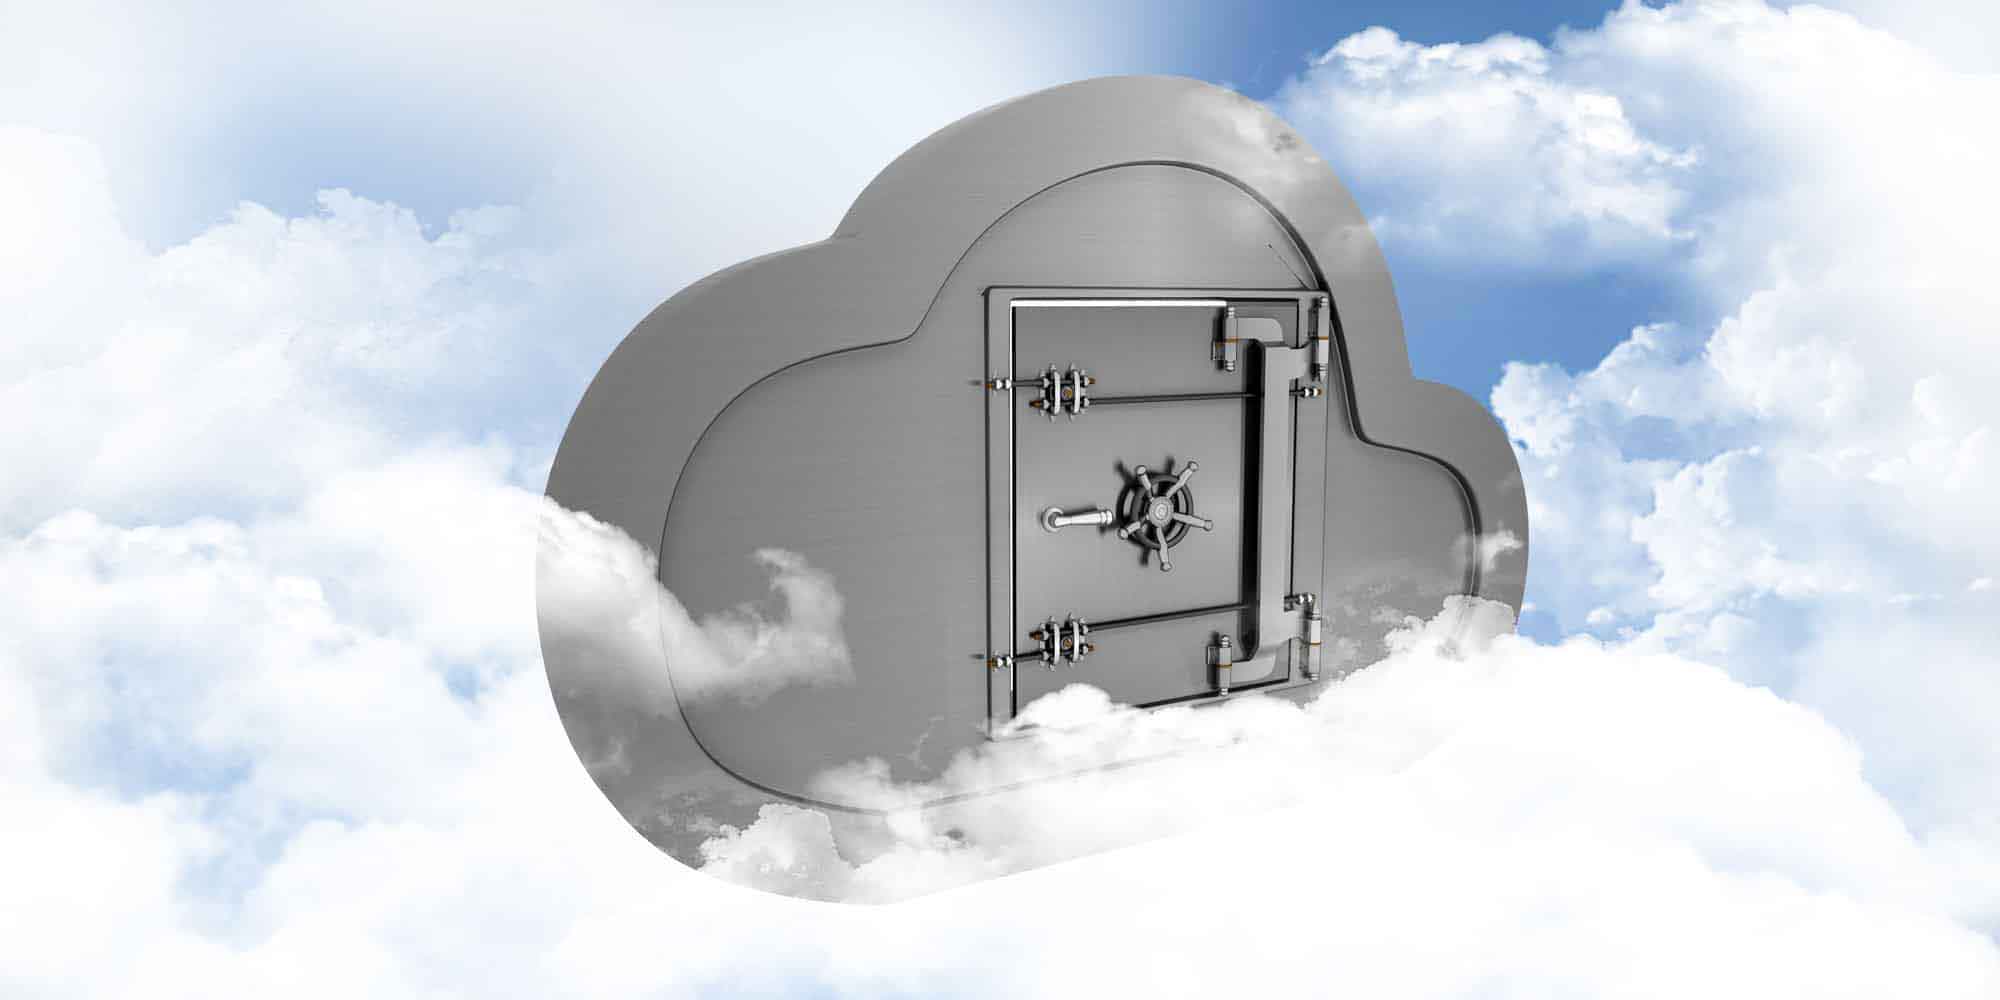  It’s the Clouds: Multicloud Computing’s Unintended Consequences